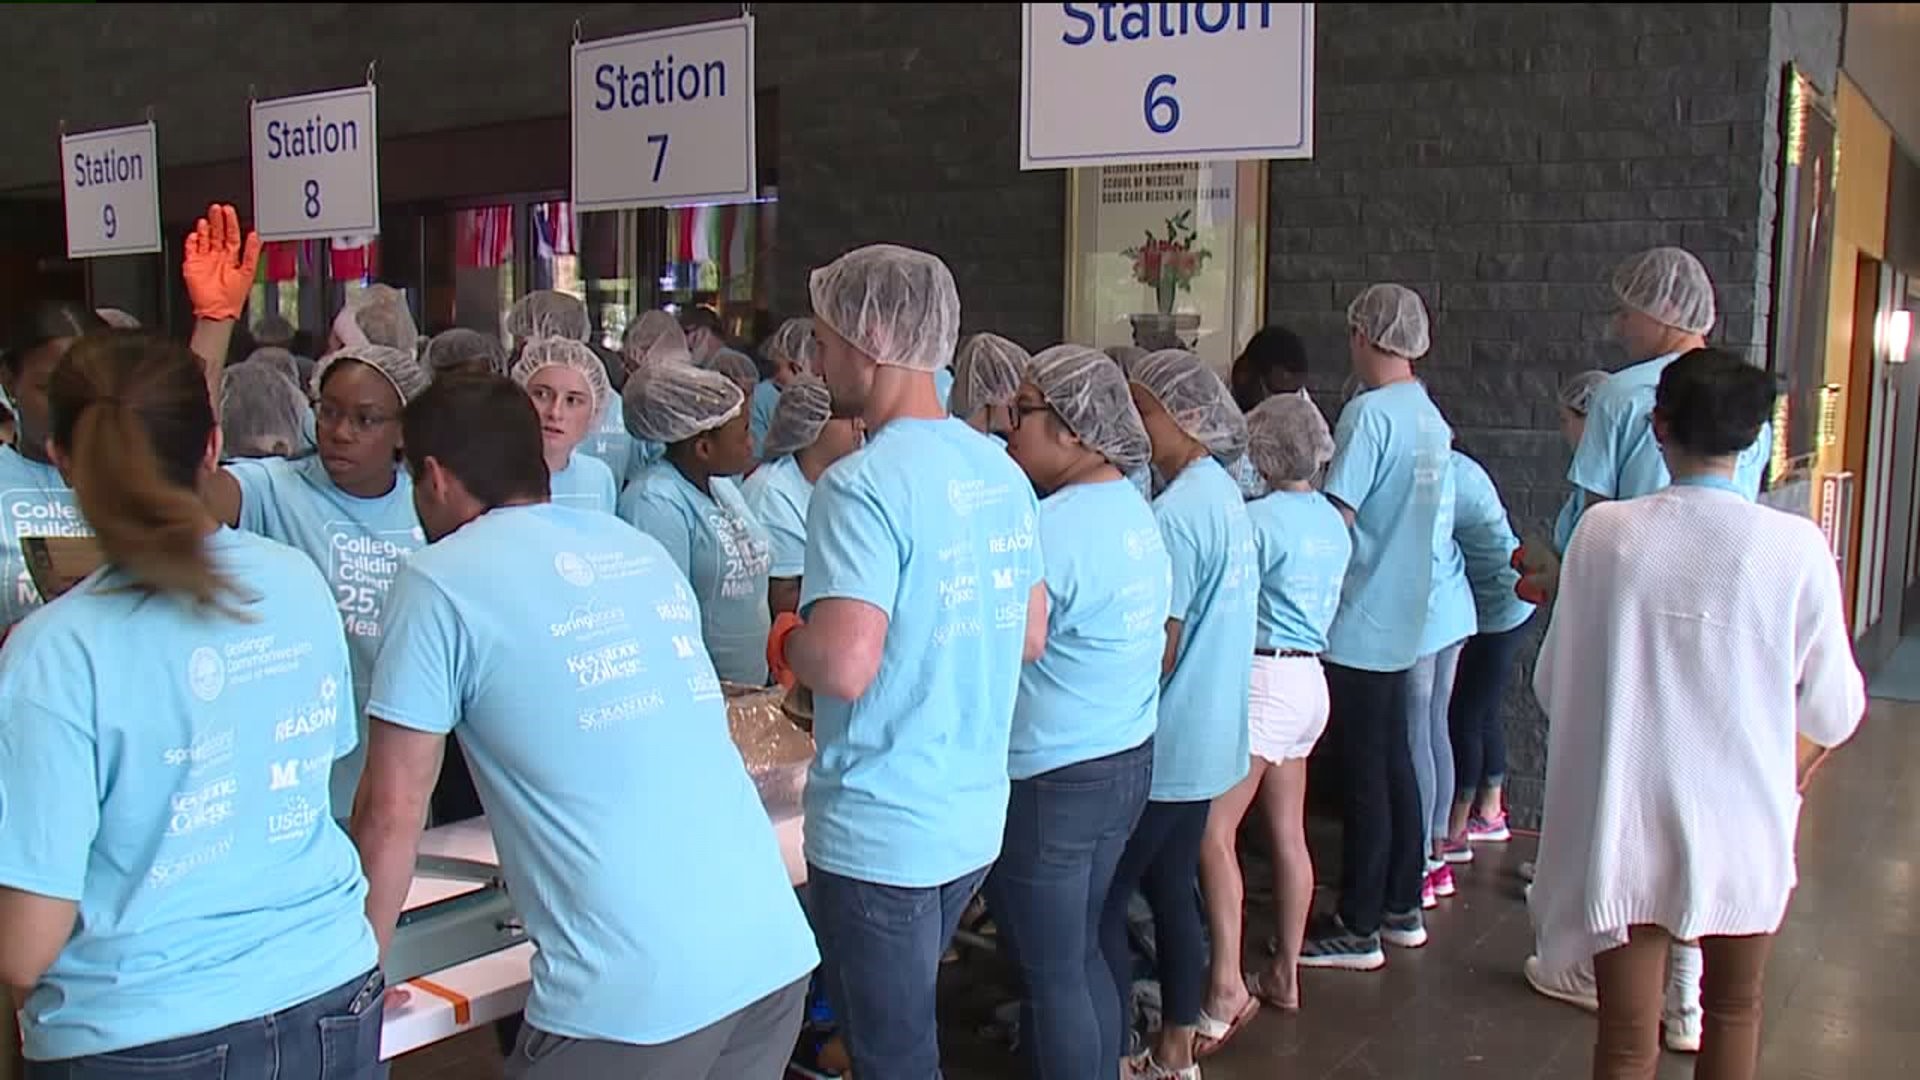 College Students Pack 25,000 Meals for Scranton Families